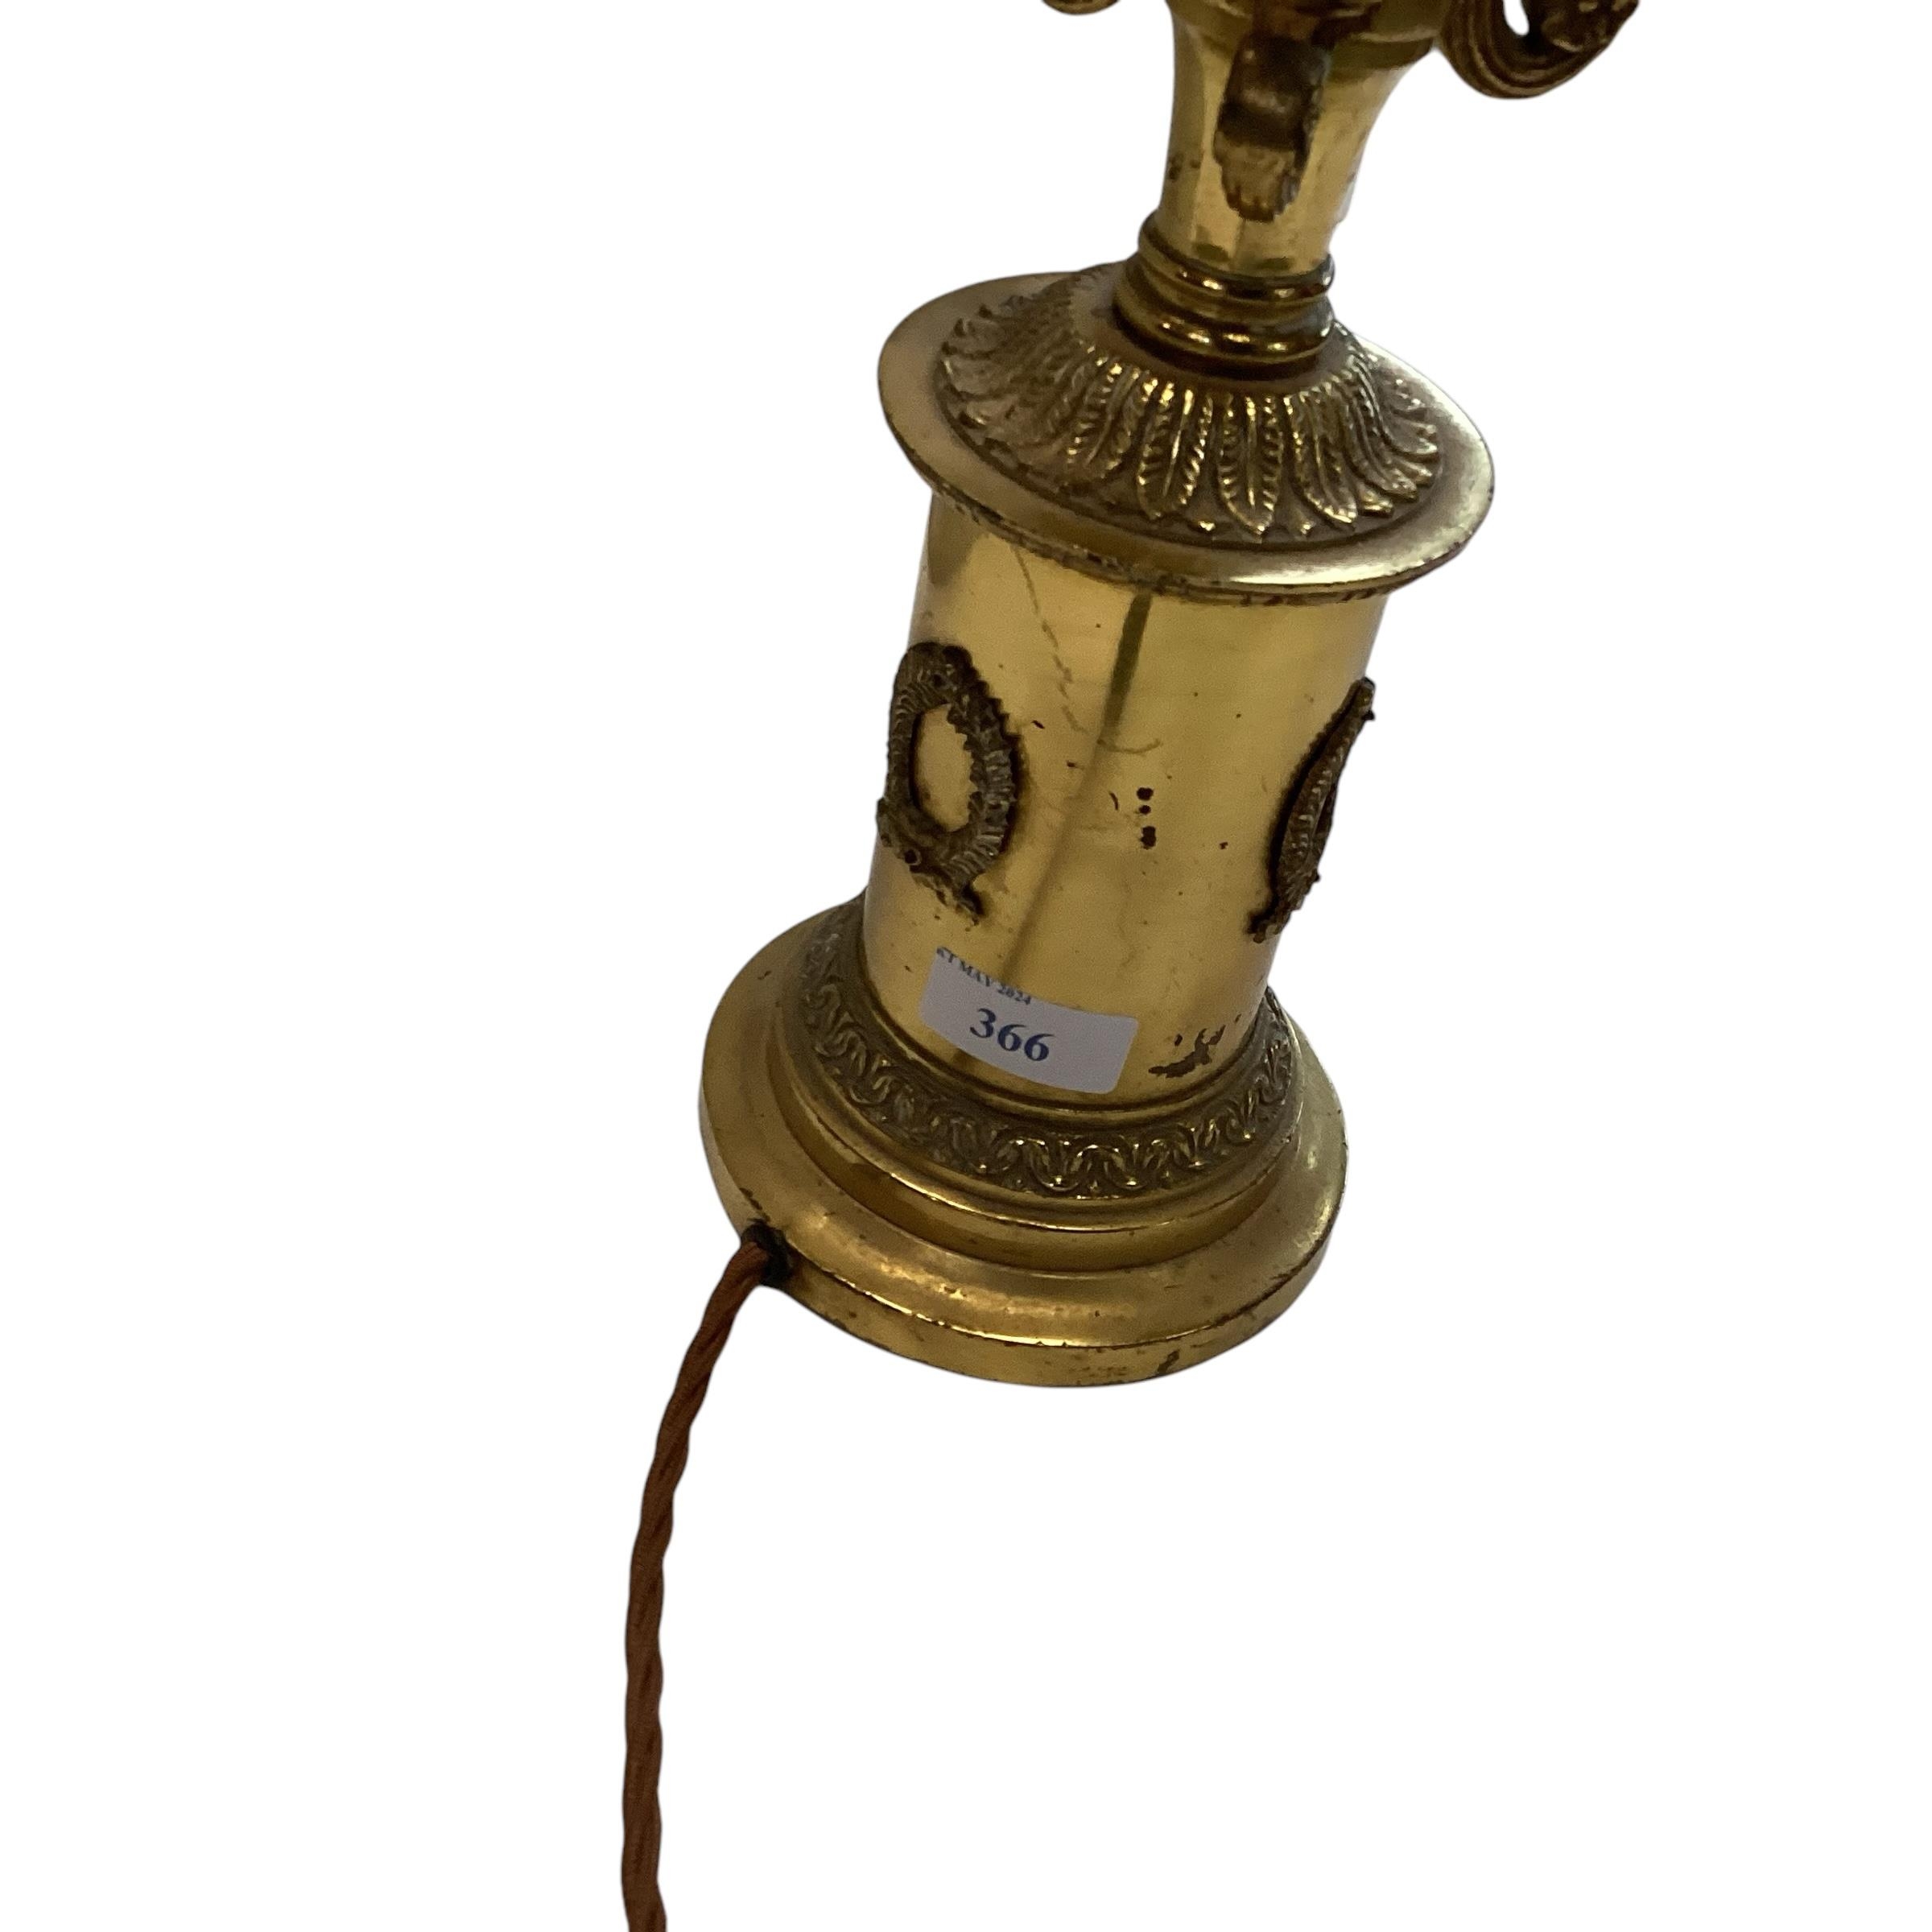 A traditional brass library table lamp with a 3 branch light to a green shade - Image 4 of 5